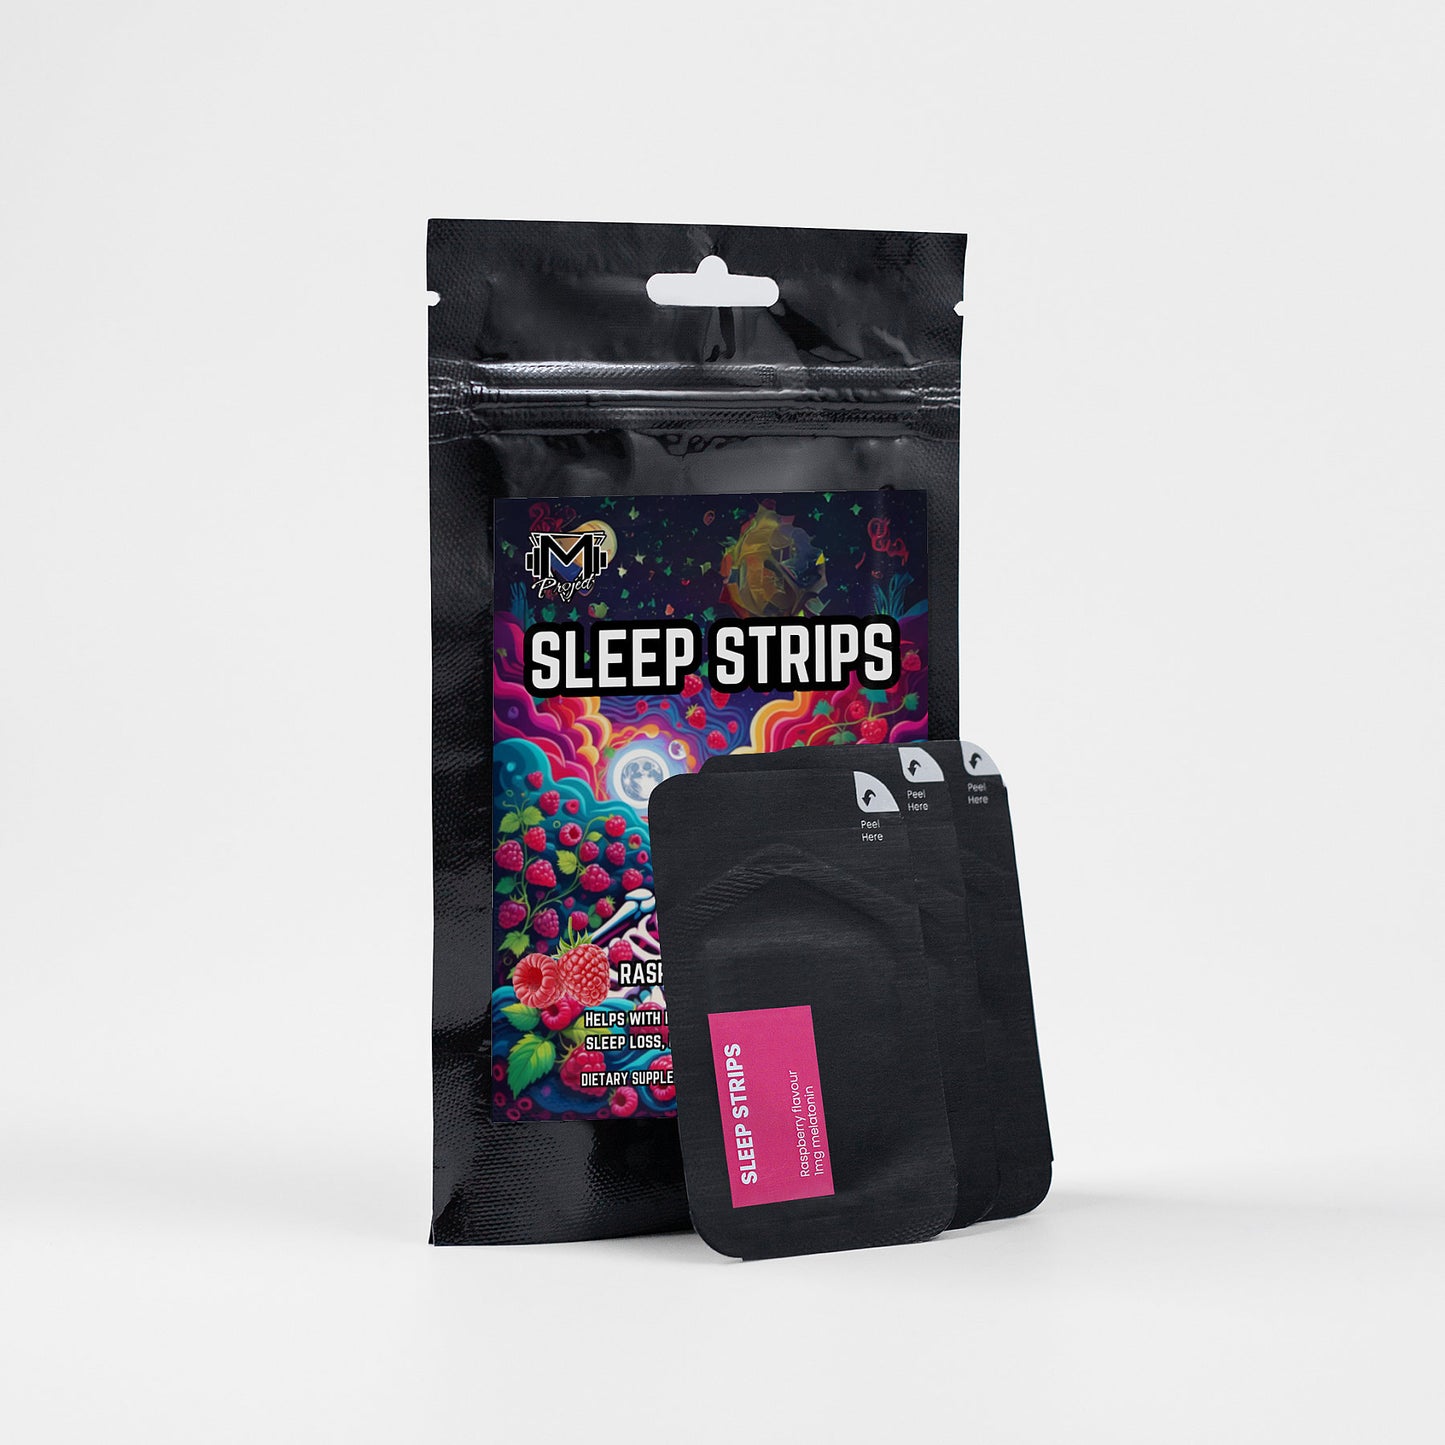 Sleep Strips by Project M